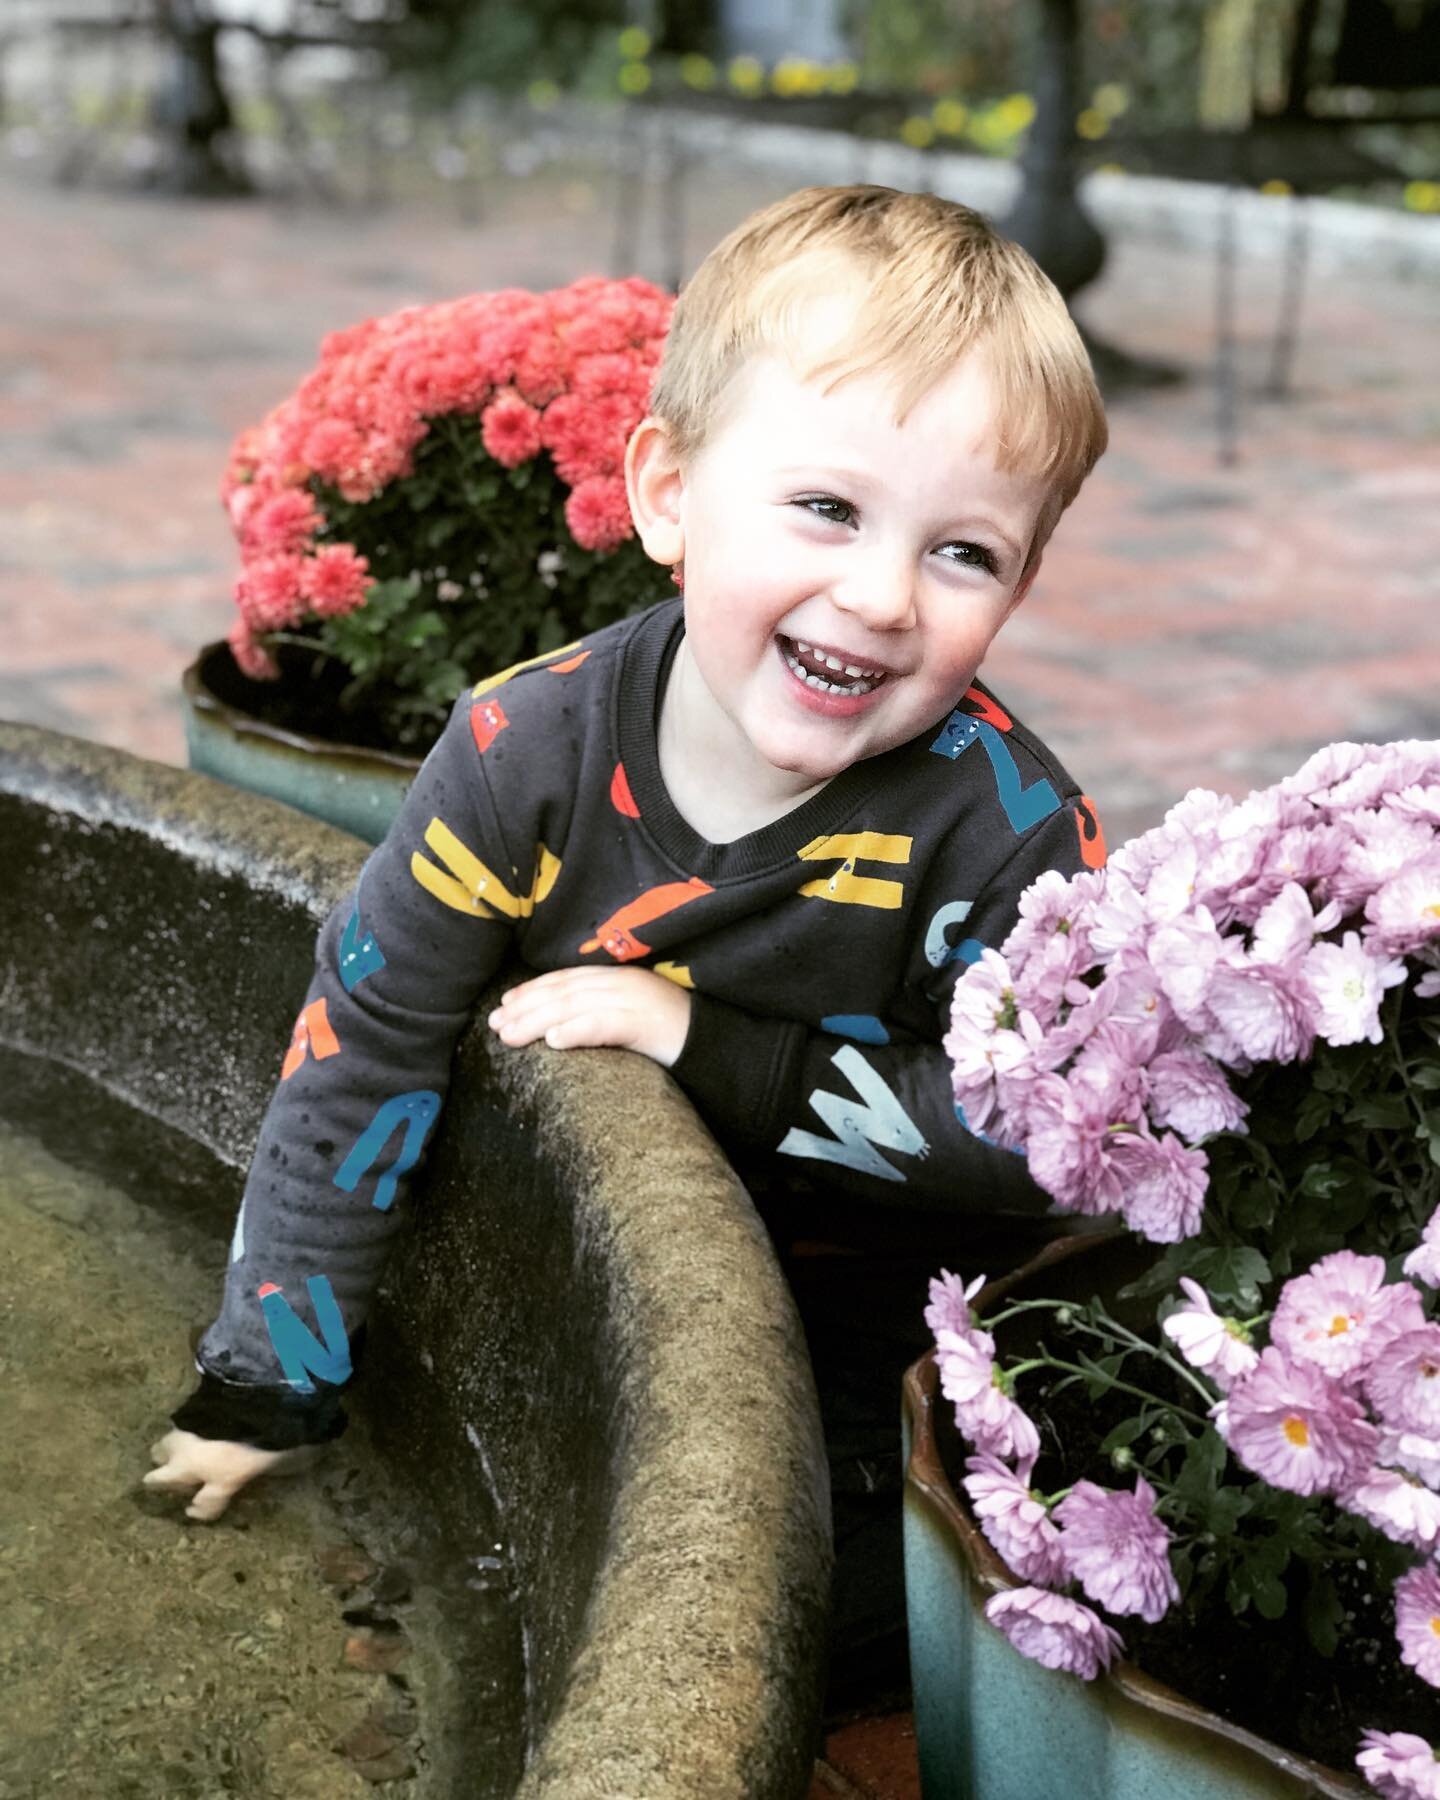 This little guy is often my assistant for Crompton restocks. Snapped this shot while we enjoyed the fountain @shopcrompton last week!